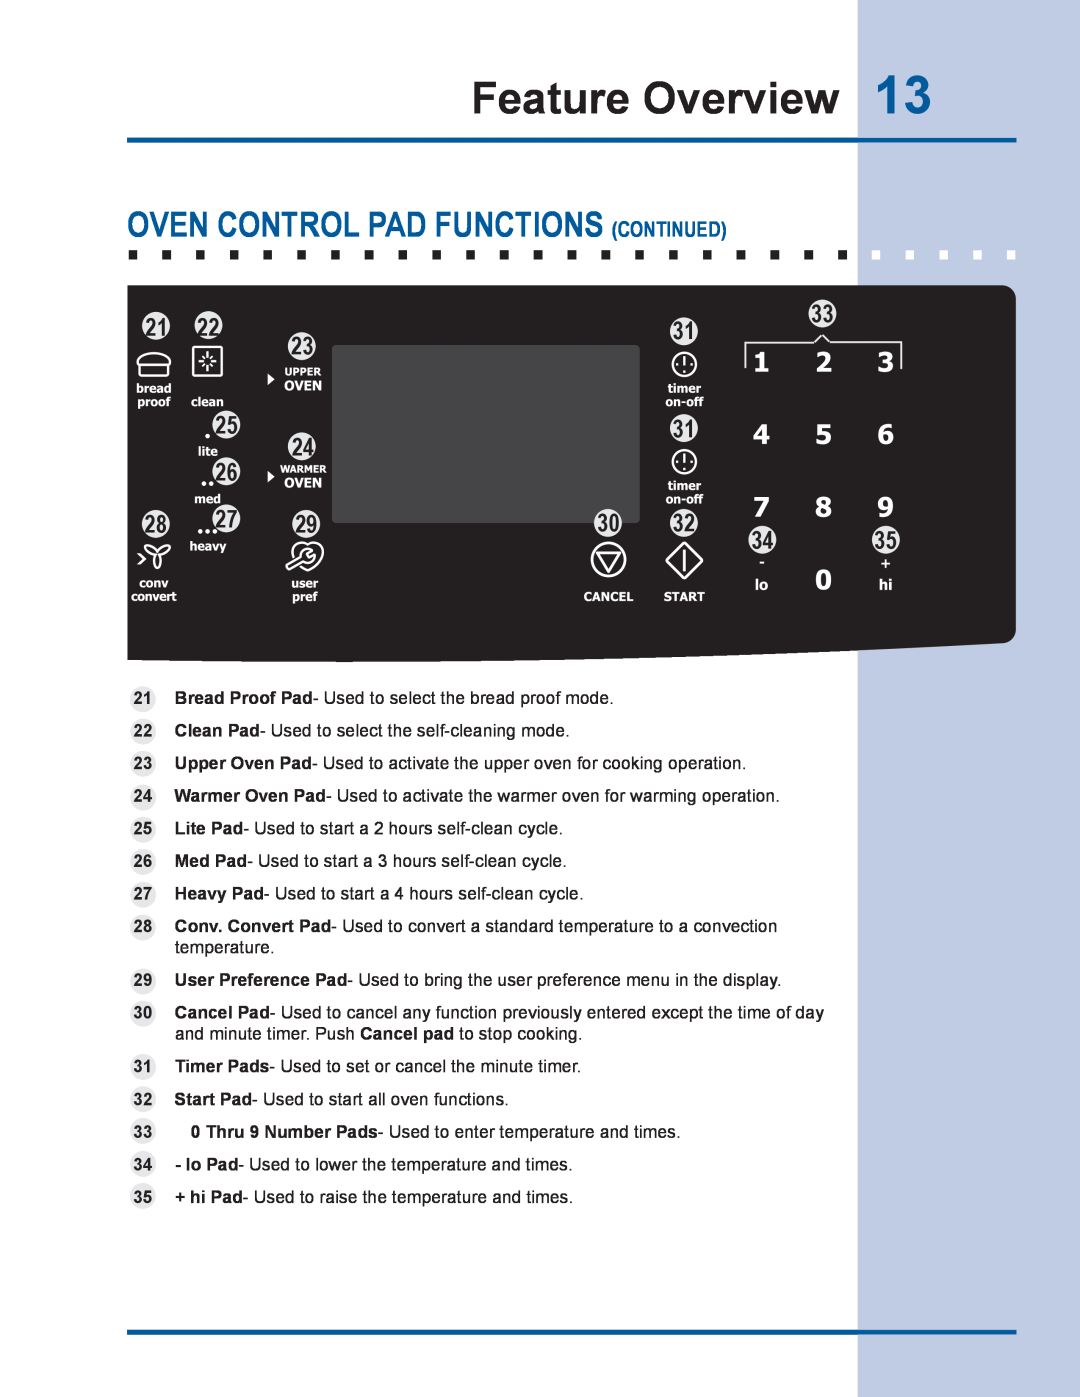 Electrolux EW30GS65GS manual Oven Control pad functions Continued, Feature Overview 